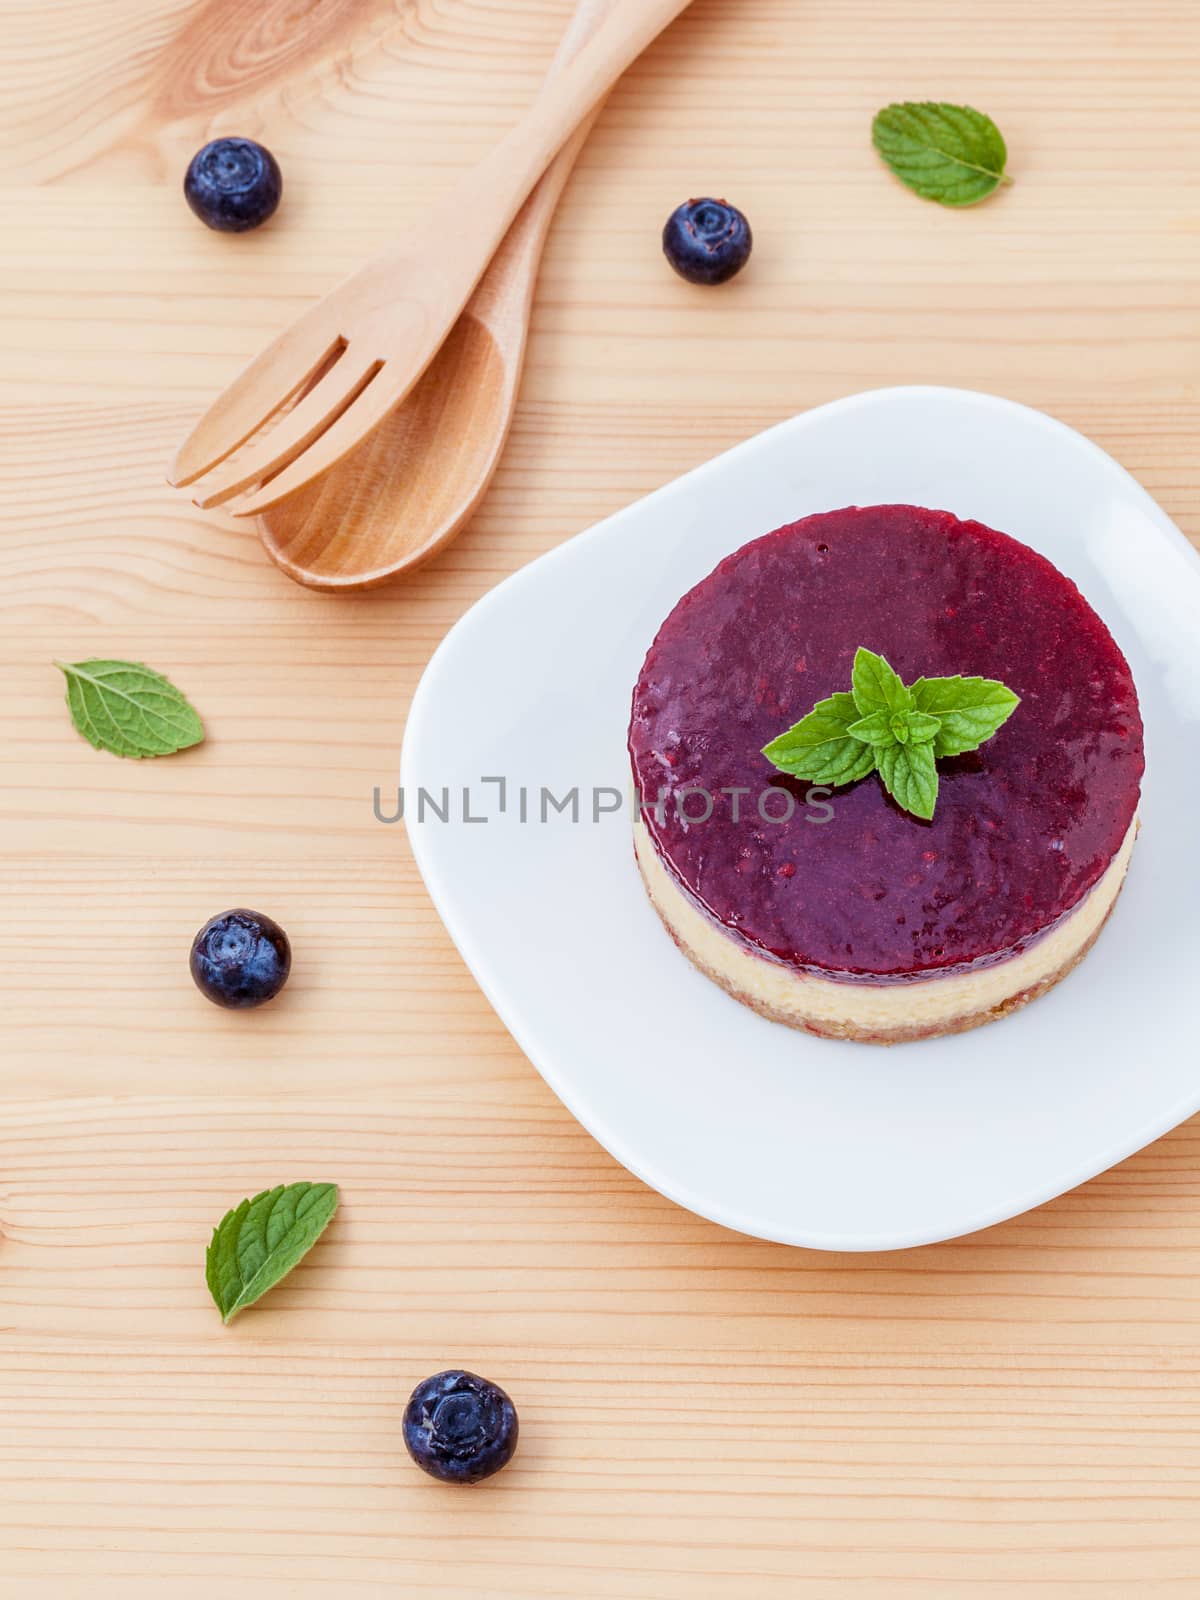 Blueberry cheesecake with fresh mint leaves on wooden background. Selective focus depth of field. 